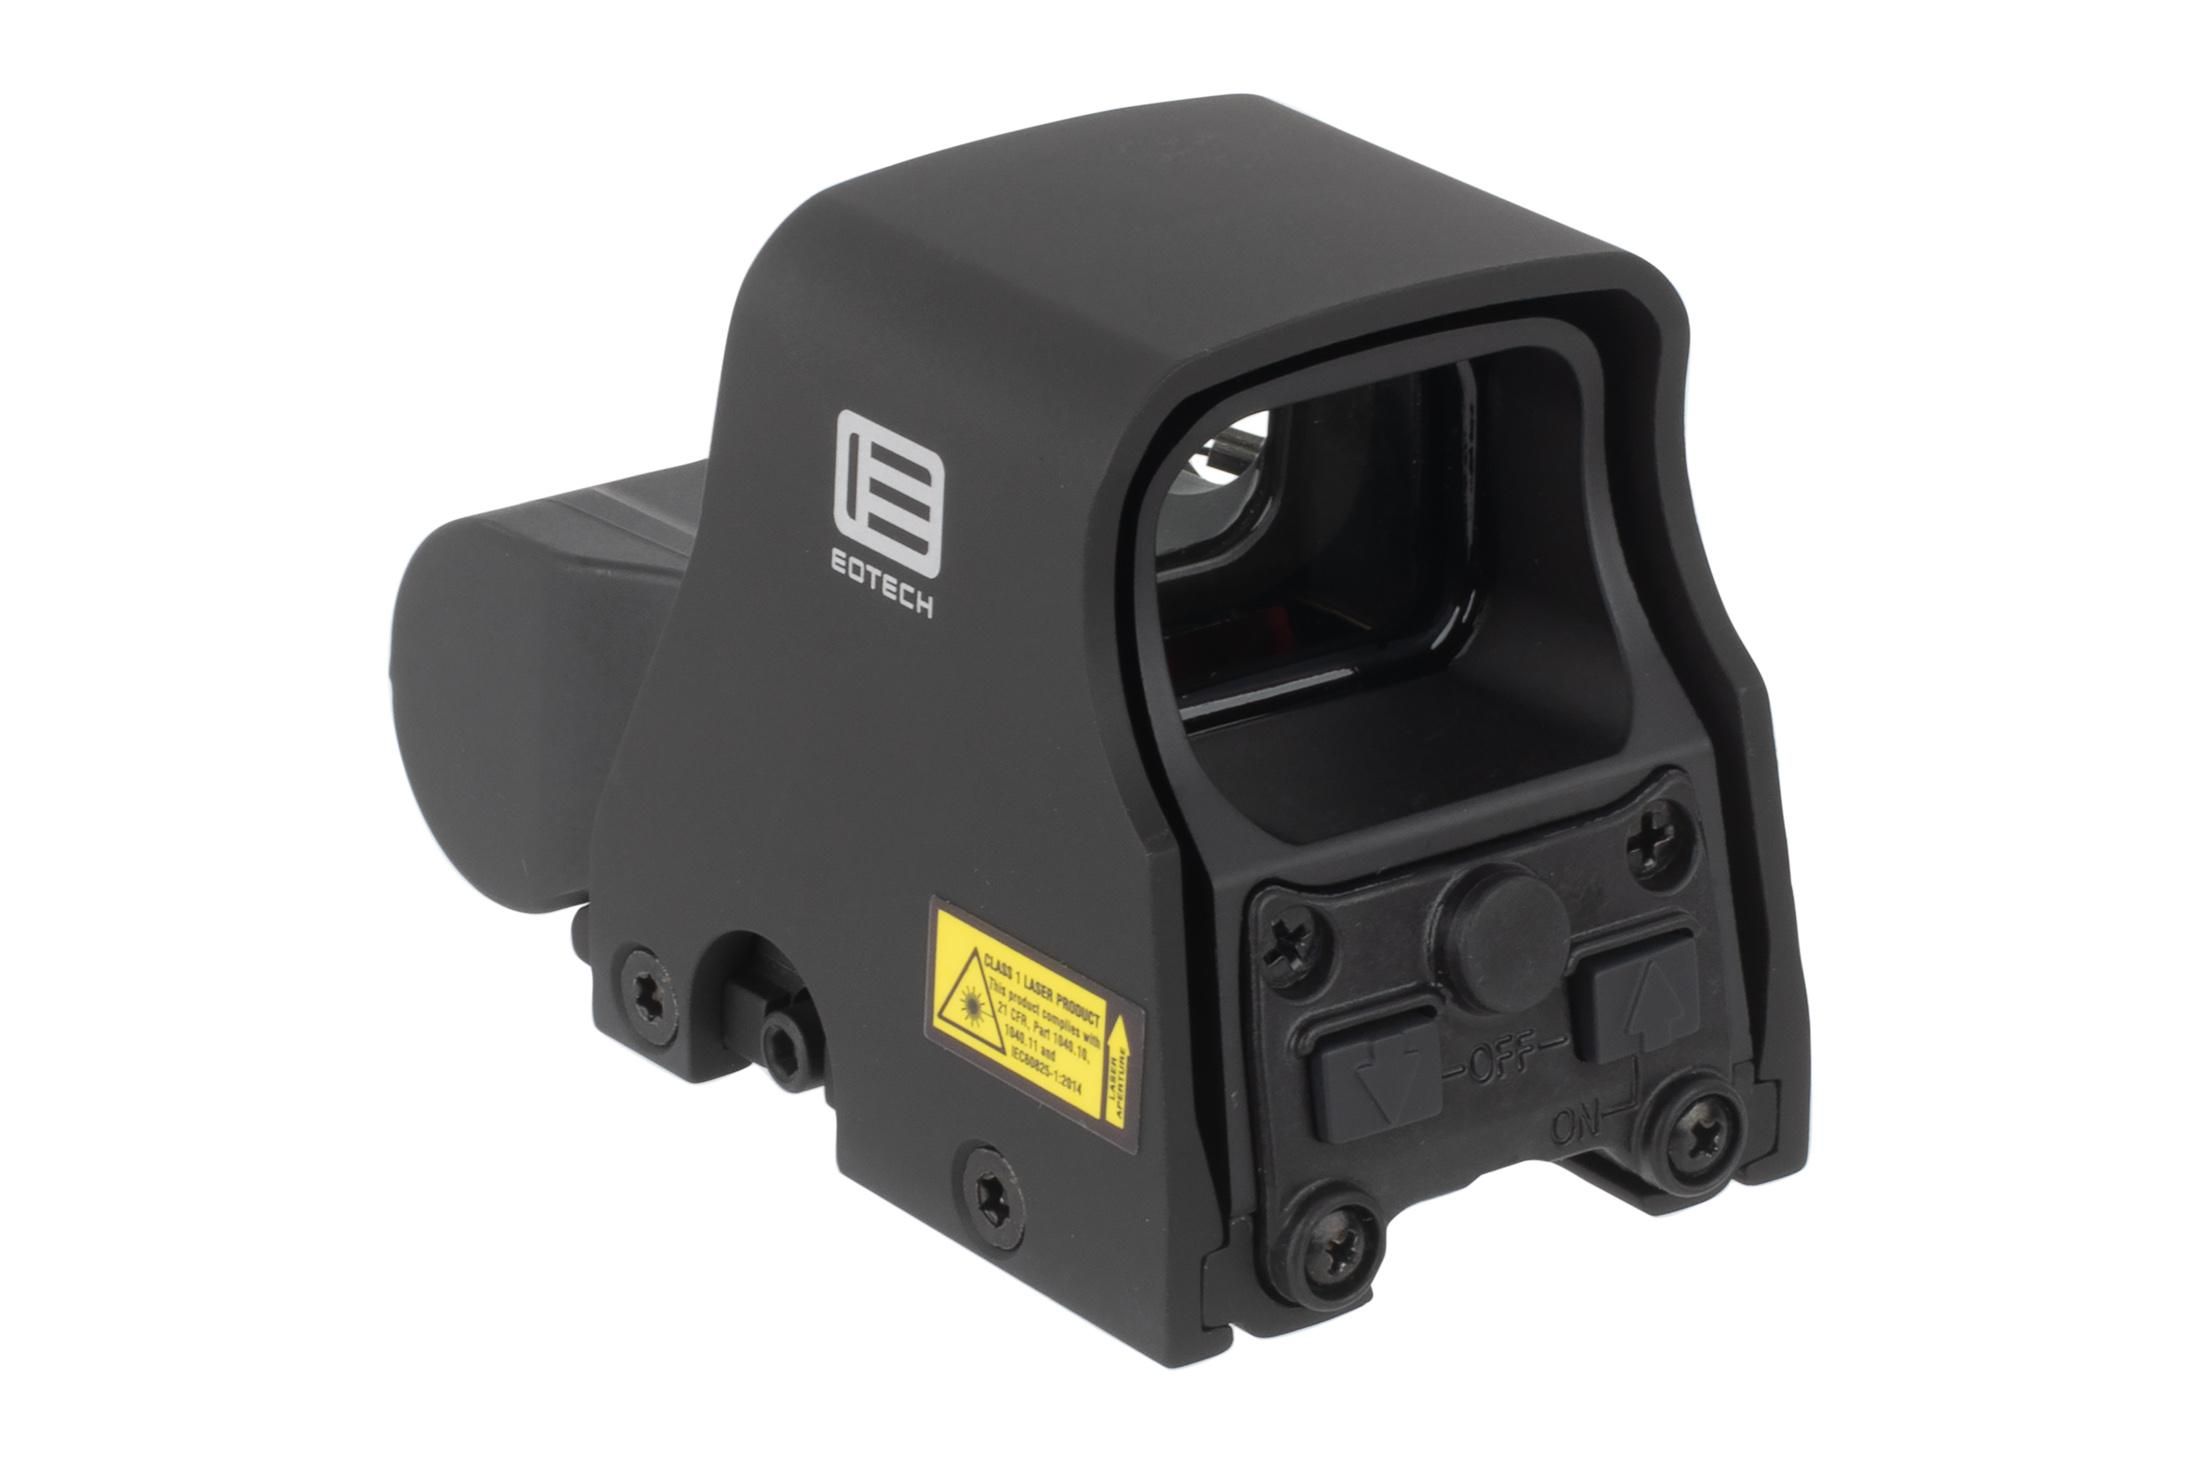 EOTECH XPS2-1 Holographic Weapon Sight